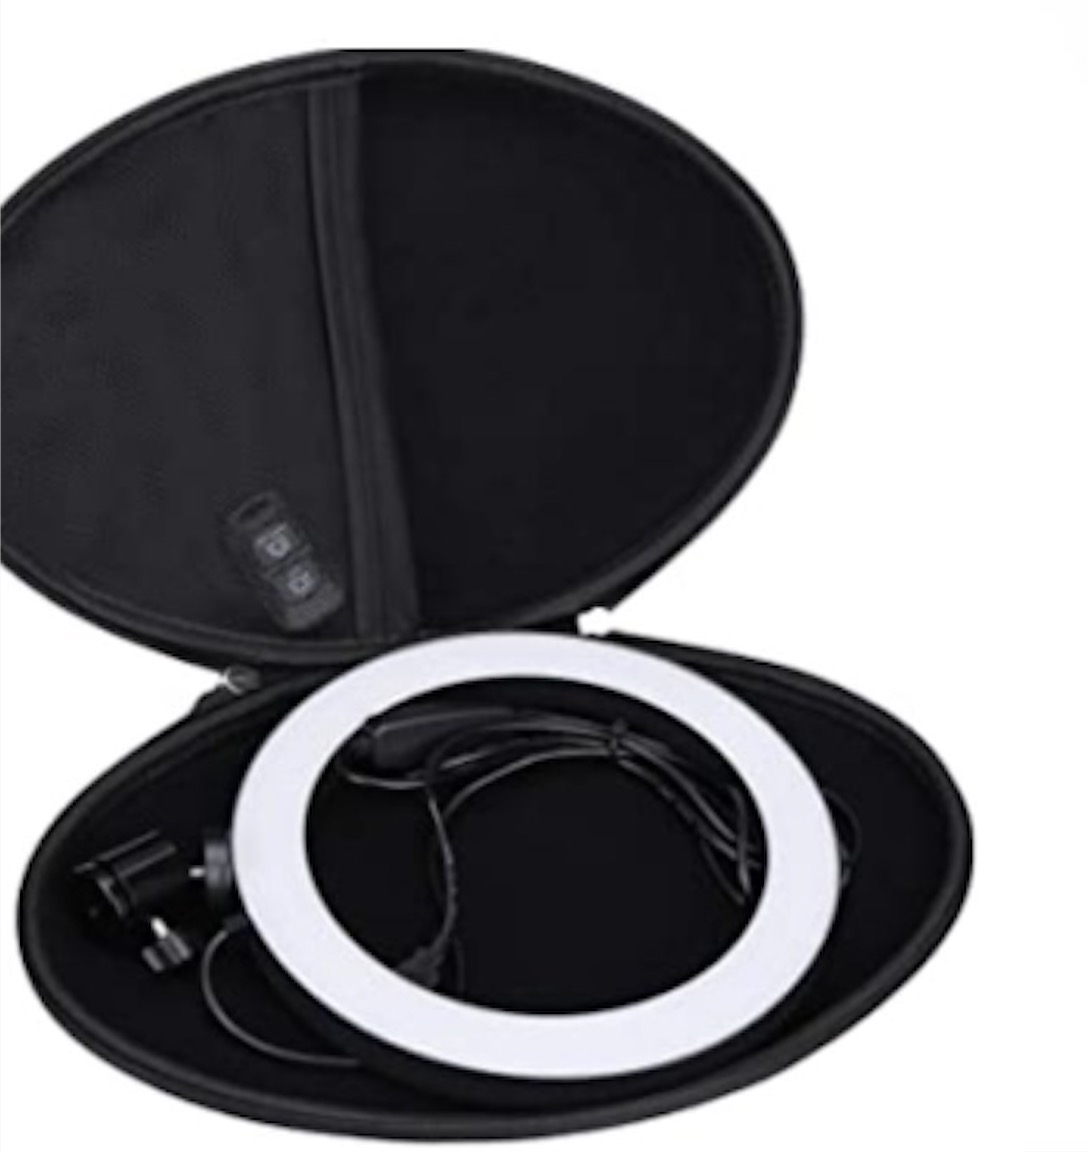 6 inches 8 inches LED soft ring light with 10 levels of adjustable brightness RL002